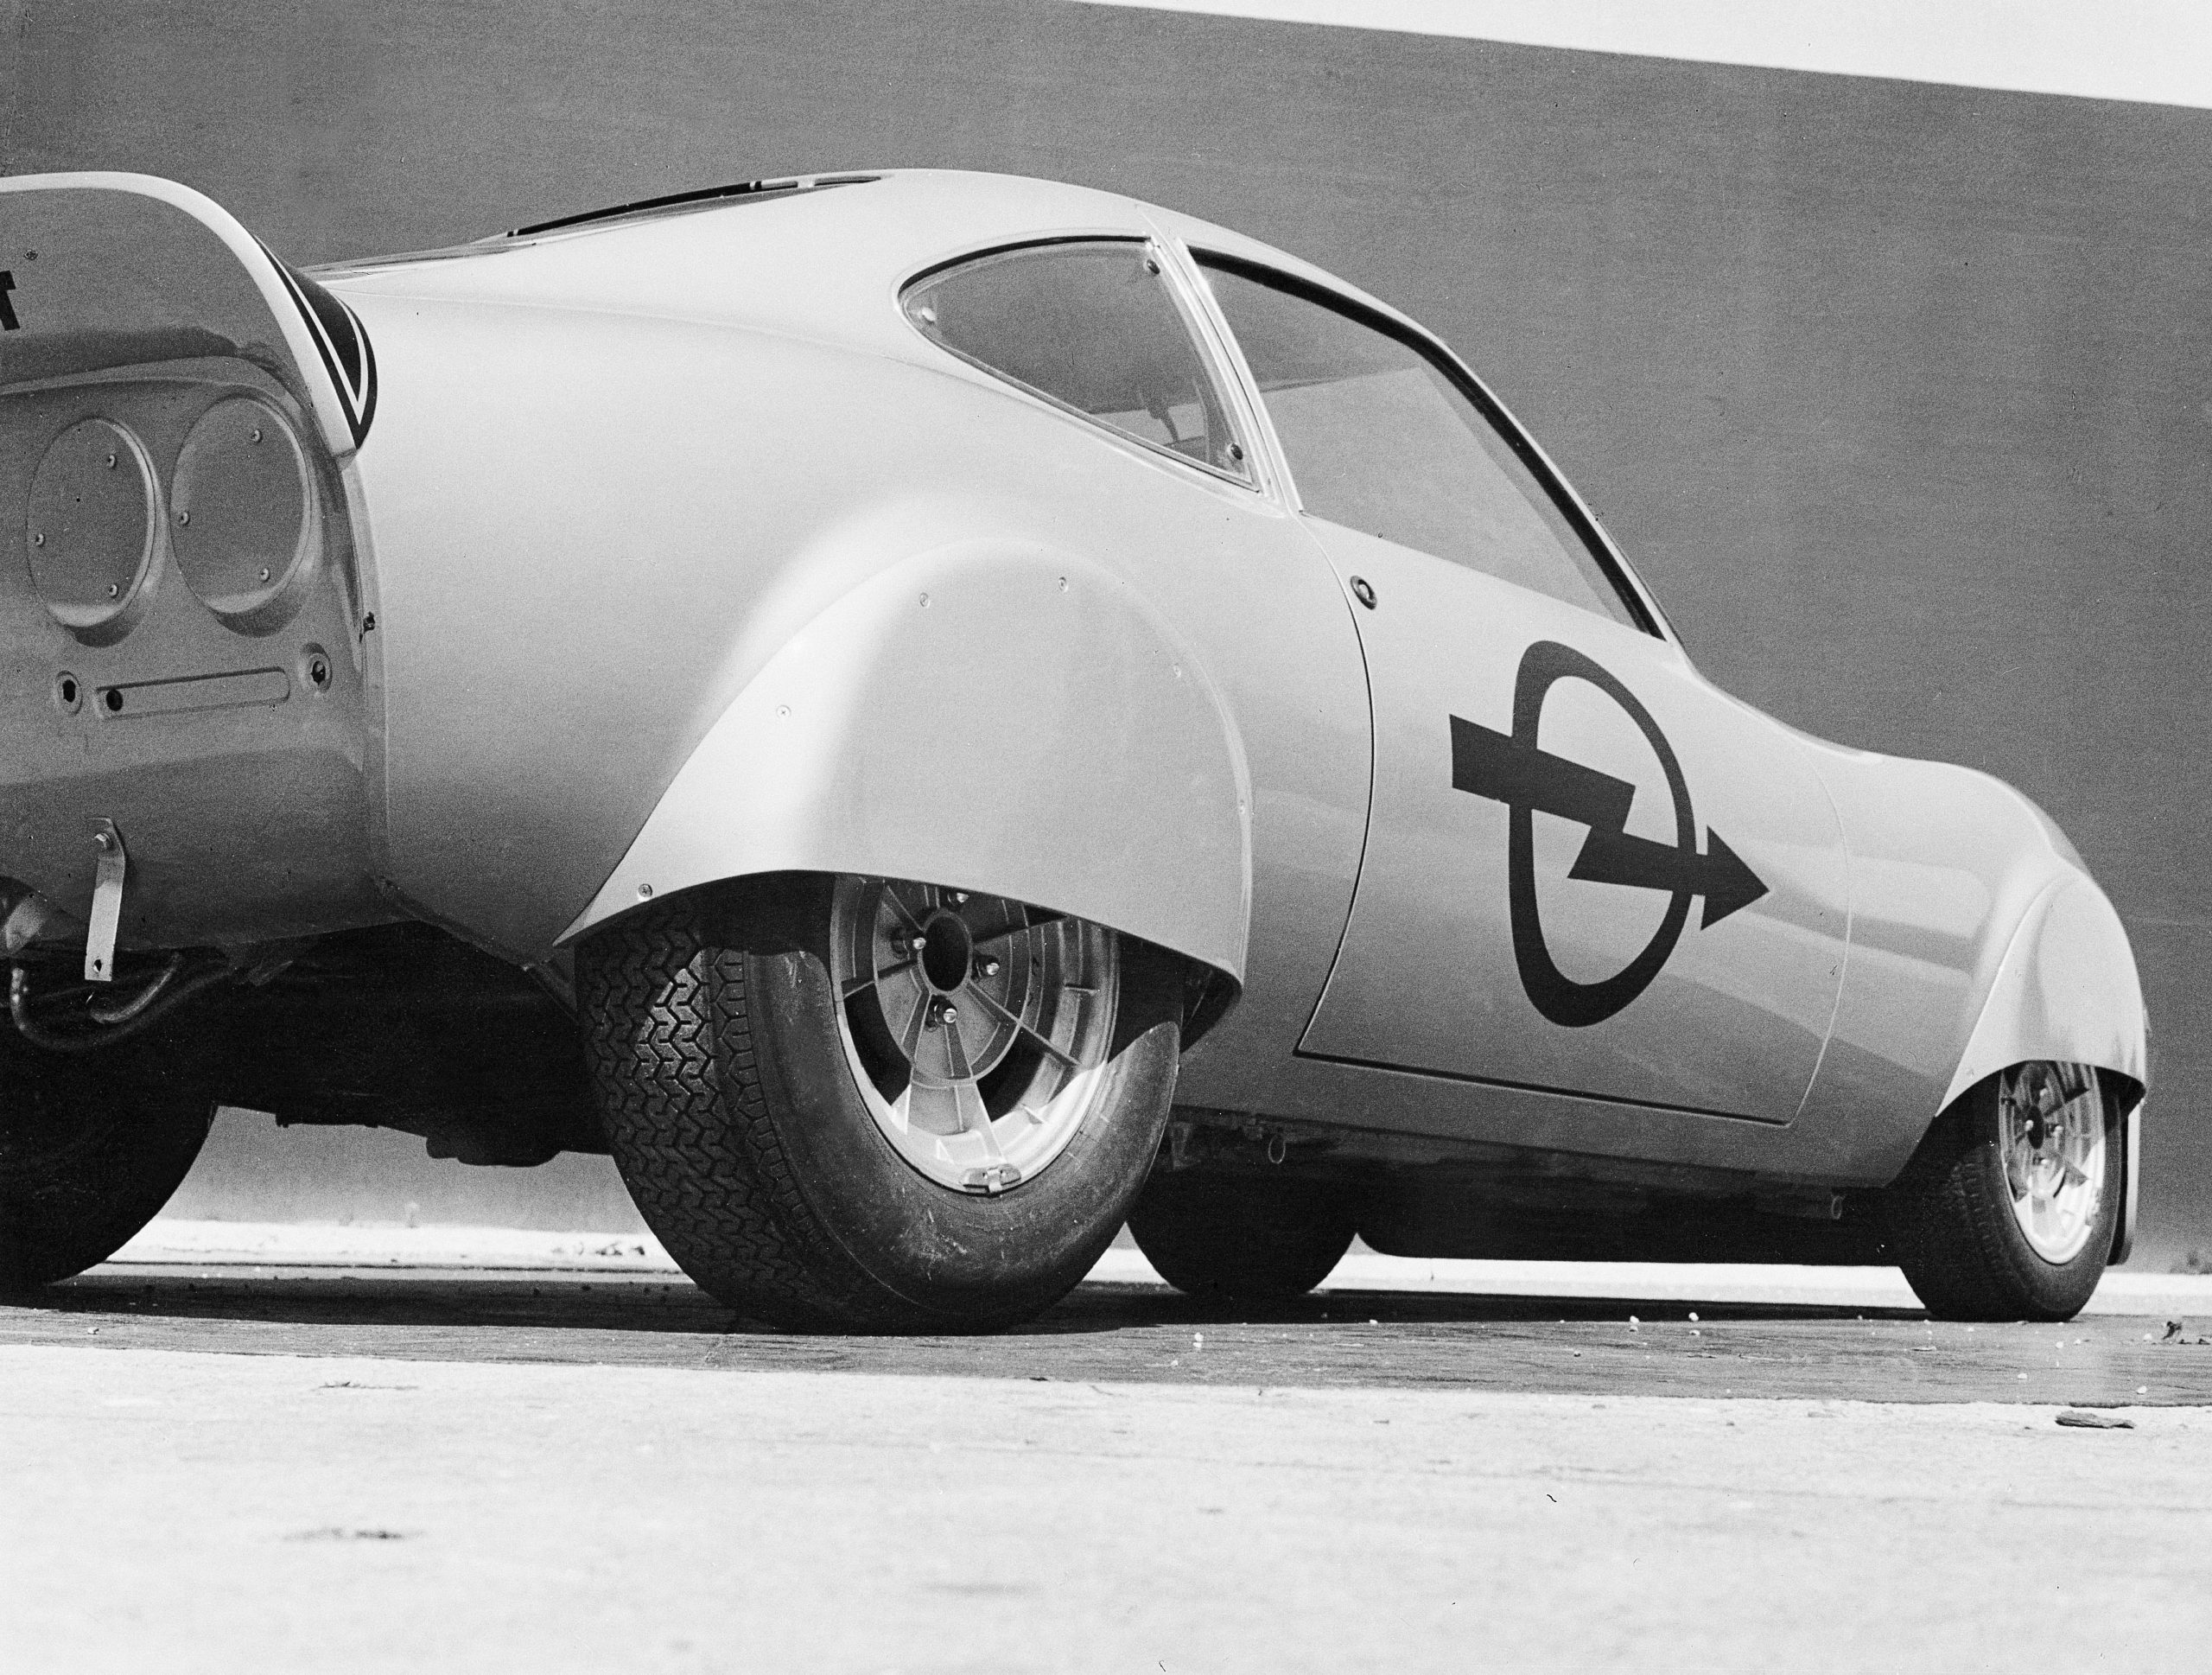 Opel GT was EV experiment 50 years ago, but diesel won…